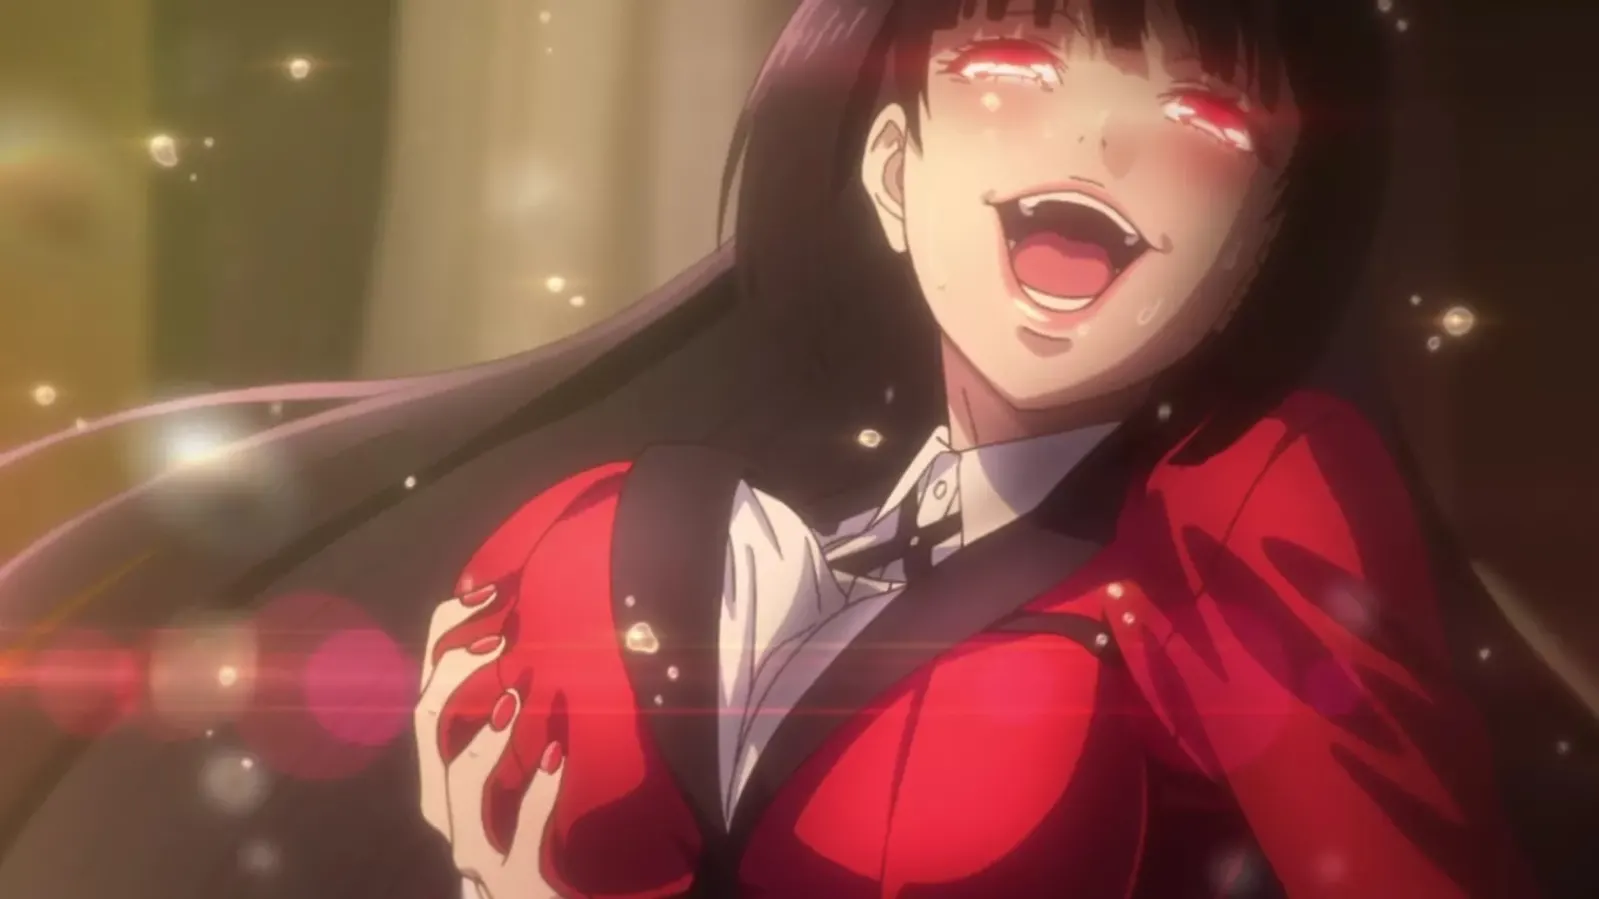 Yumeko gets a little too excited during her latest bet. This probably isn’t a show to watch with your mother. Or girlfriend. Or sister. Or anyone, really. It’s a lonely, dark, solitary pleasure best enjoyed in the dark.That’s where you belong, you pervert.